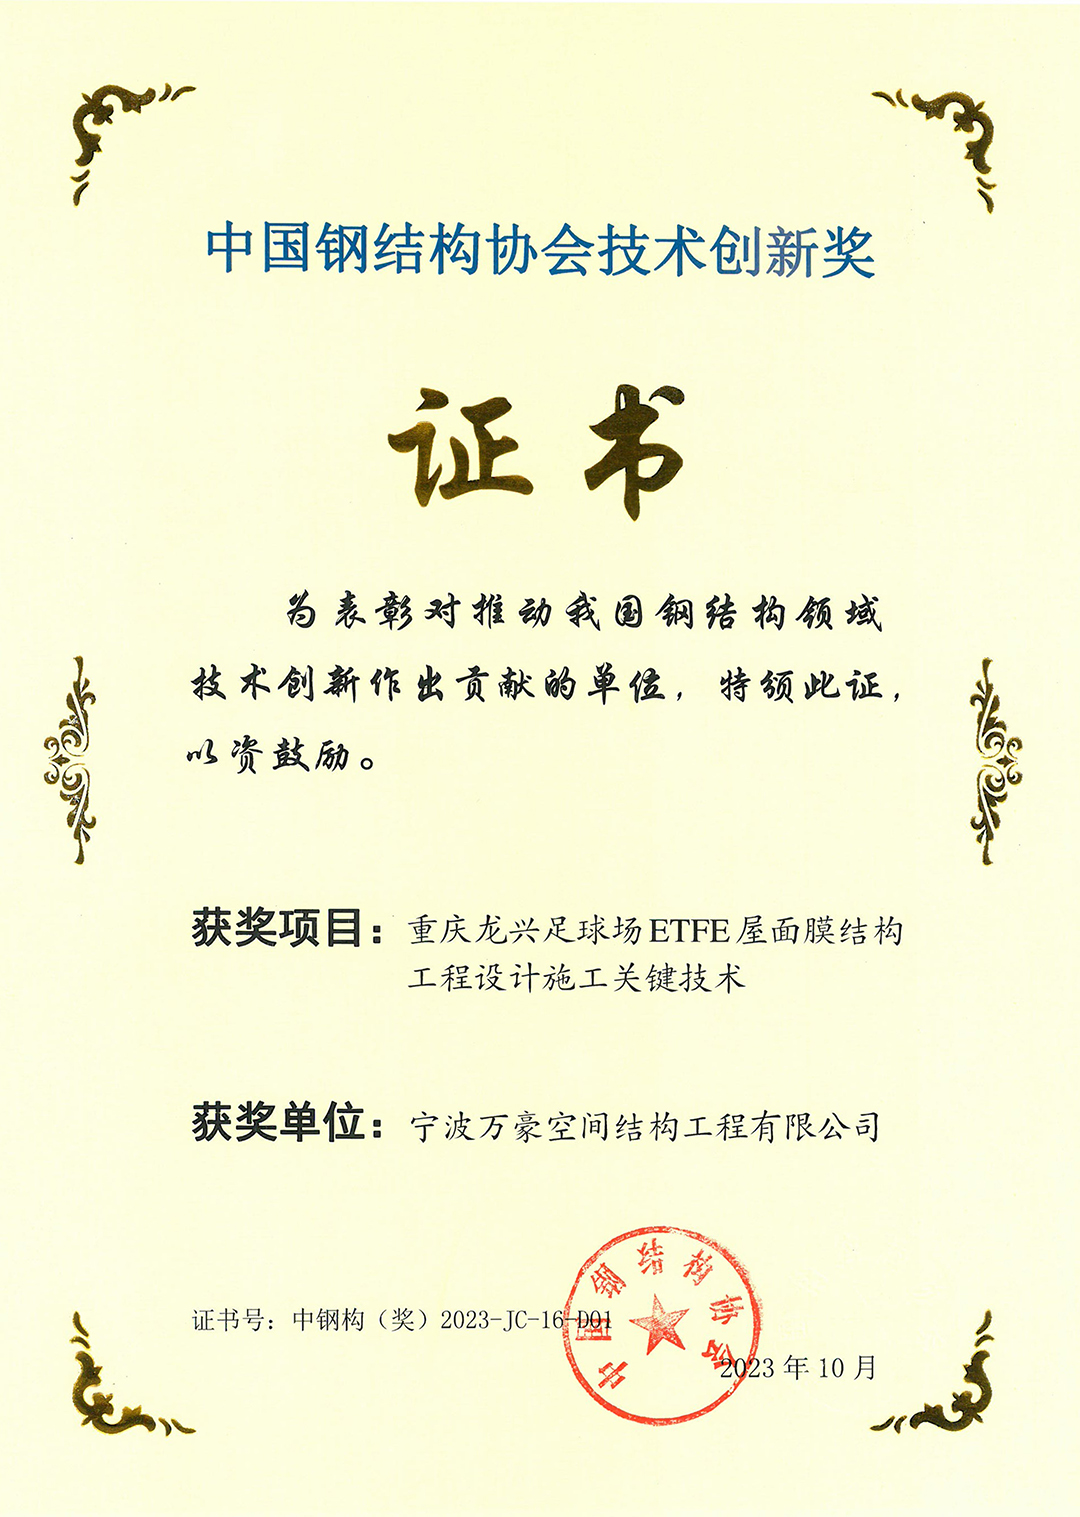 Good news!! Congratulations on winning the Technical Innovation Award of China Steel Structure Association